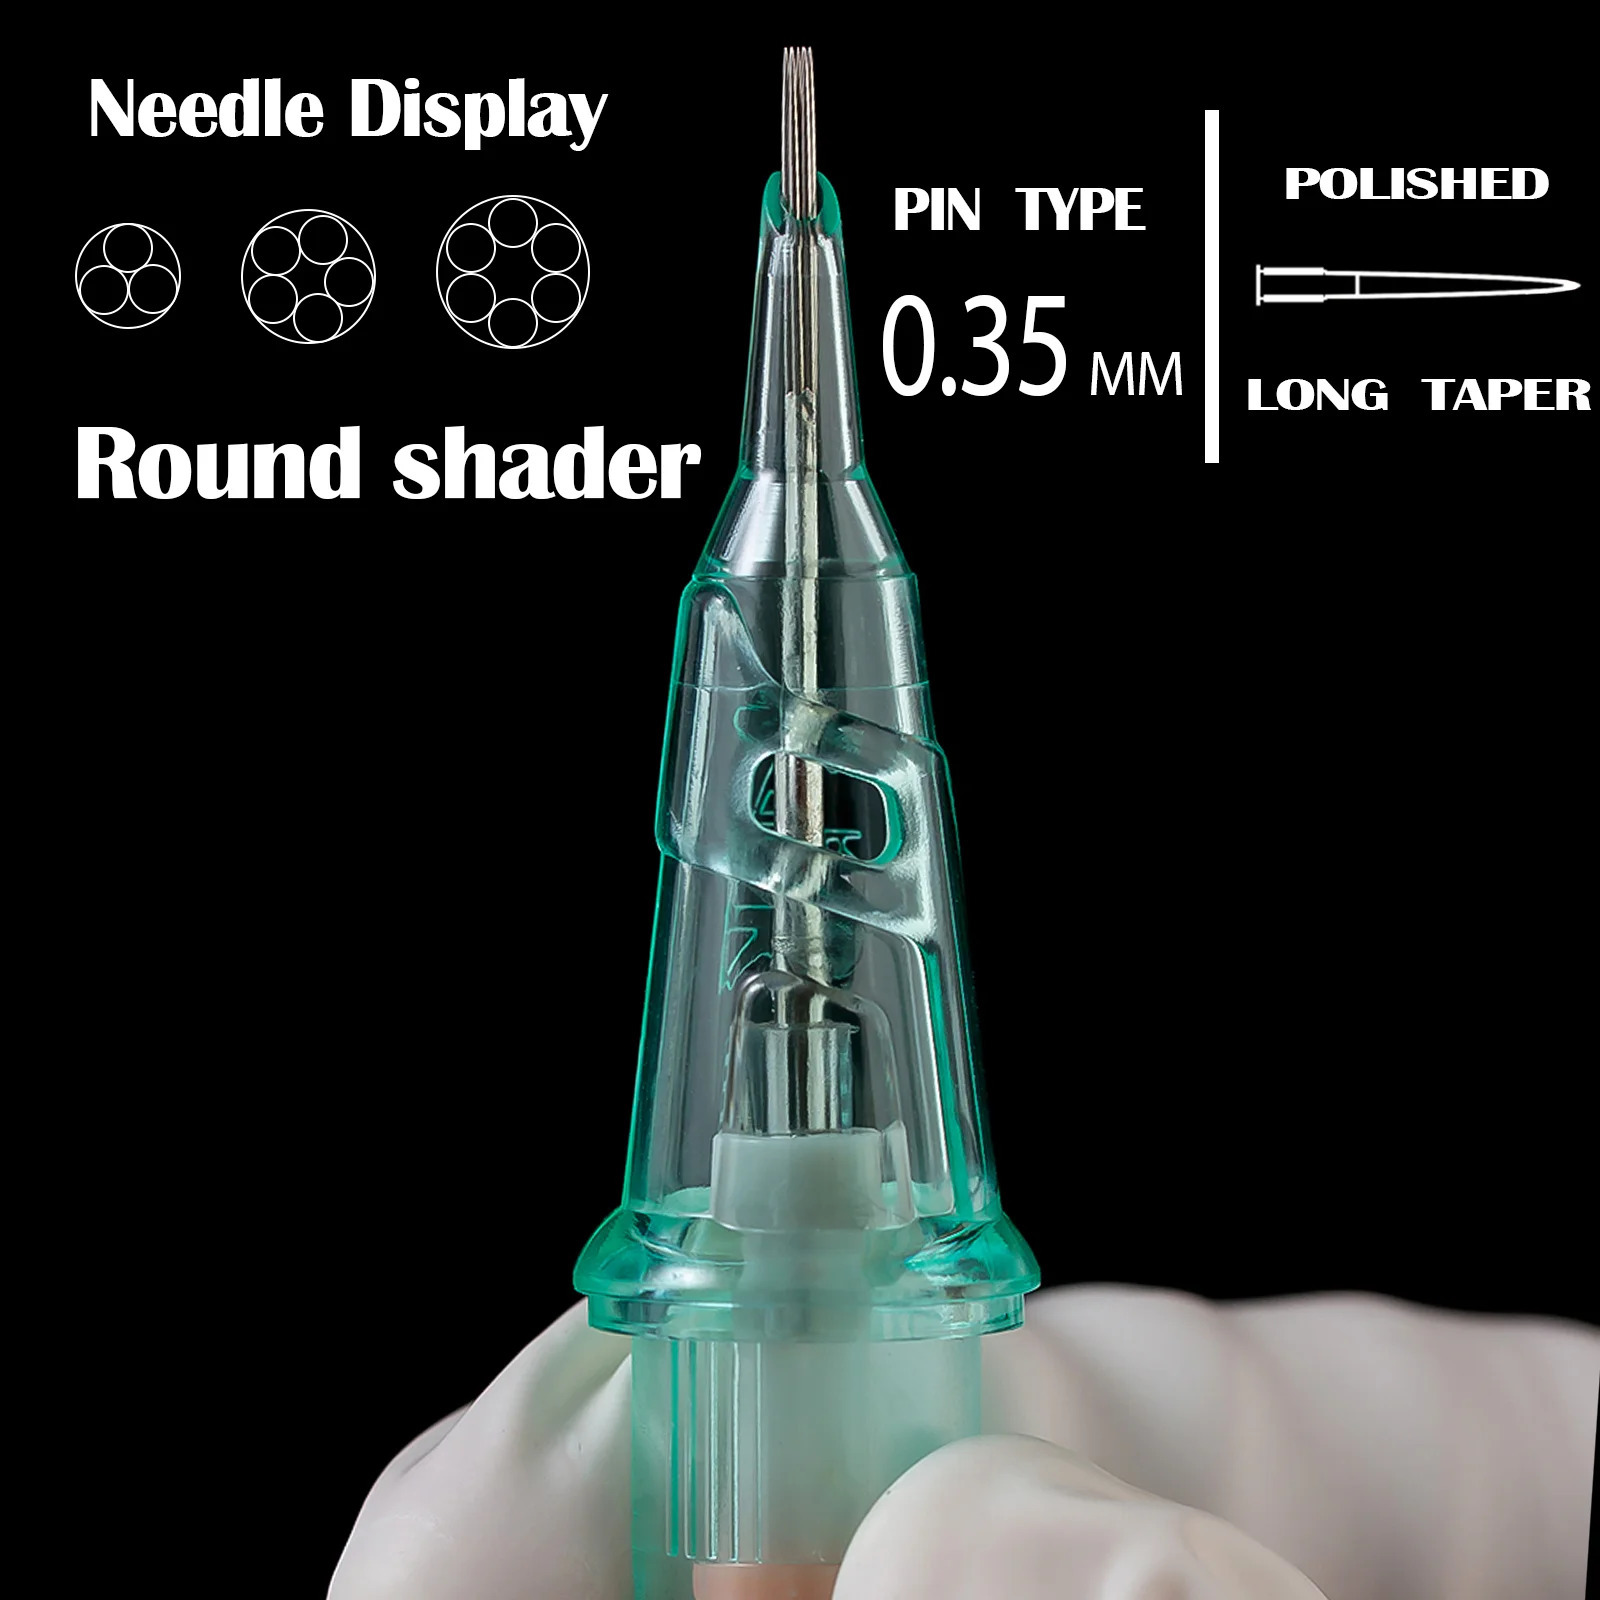 MLK BRo Tattoo Cartridge Needles Disposable Sterilized Safety Round Liner Permanent Makeup For Tattoo Machines Grips 240122